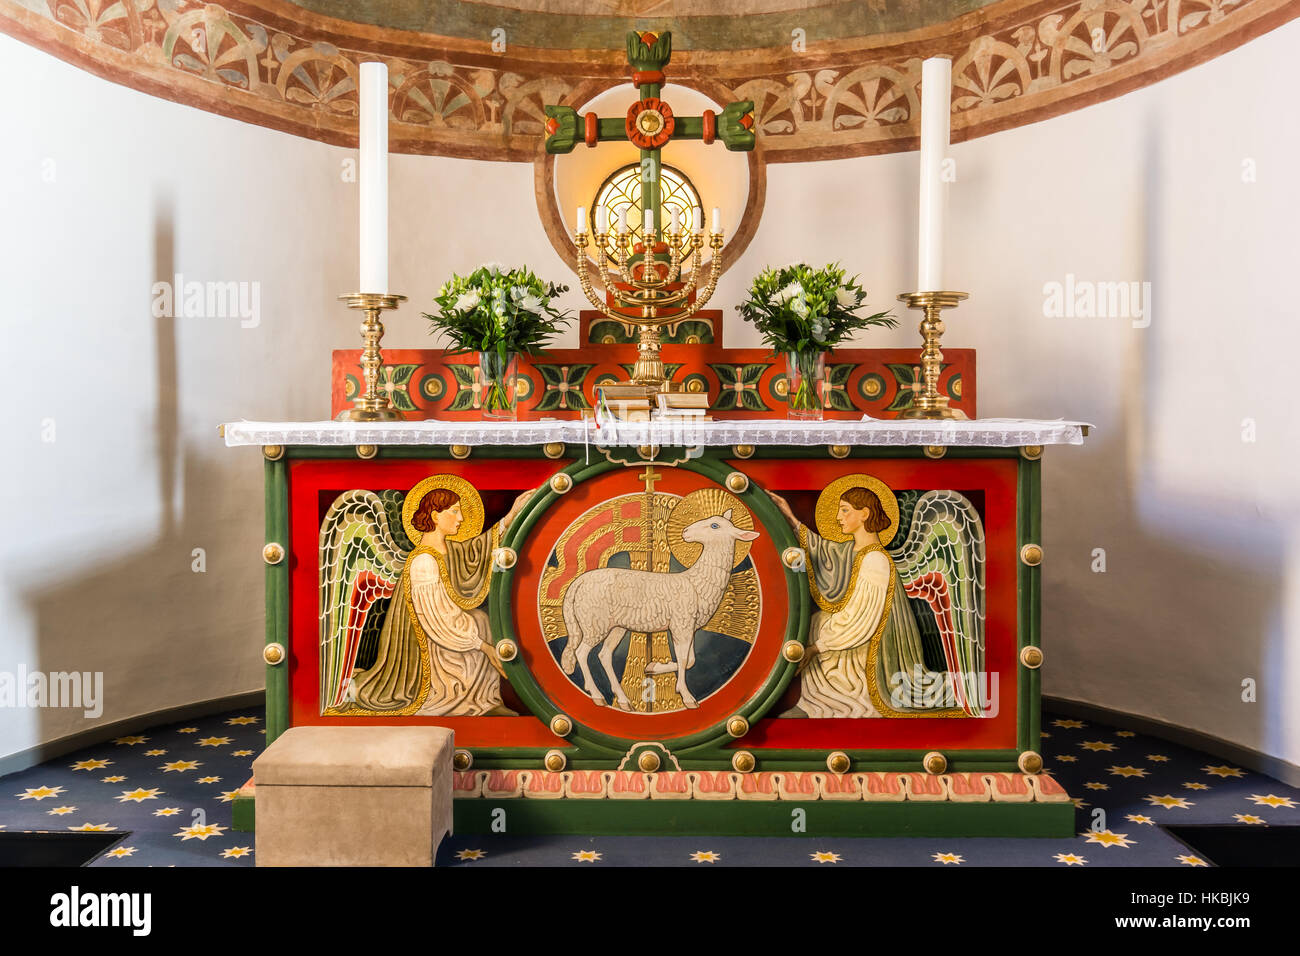 Altar with two angels and the Lamb of God On the altar is a seven-branched candlestick, Tveje Merlose, Denmark - January 23, 2017, Stock Photo